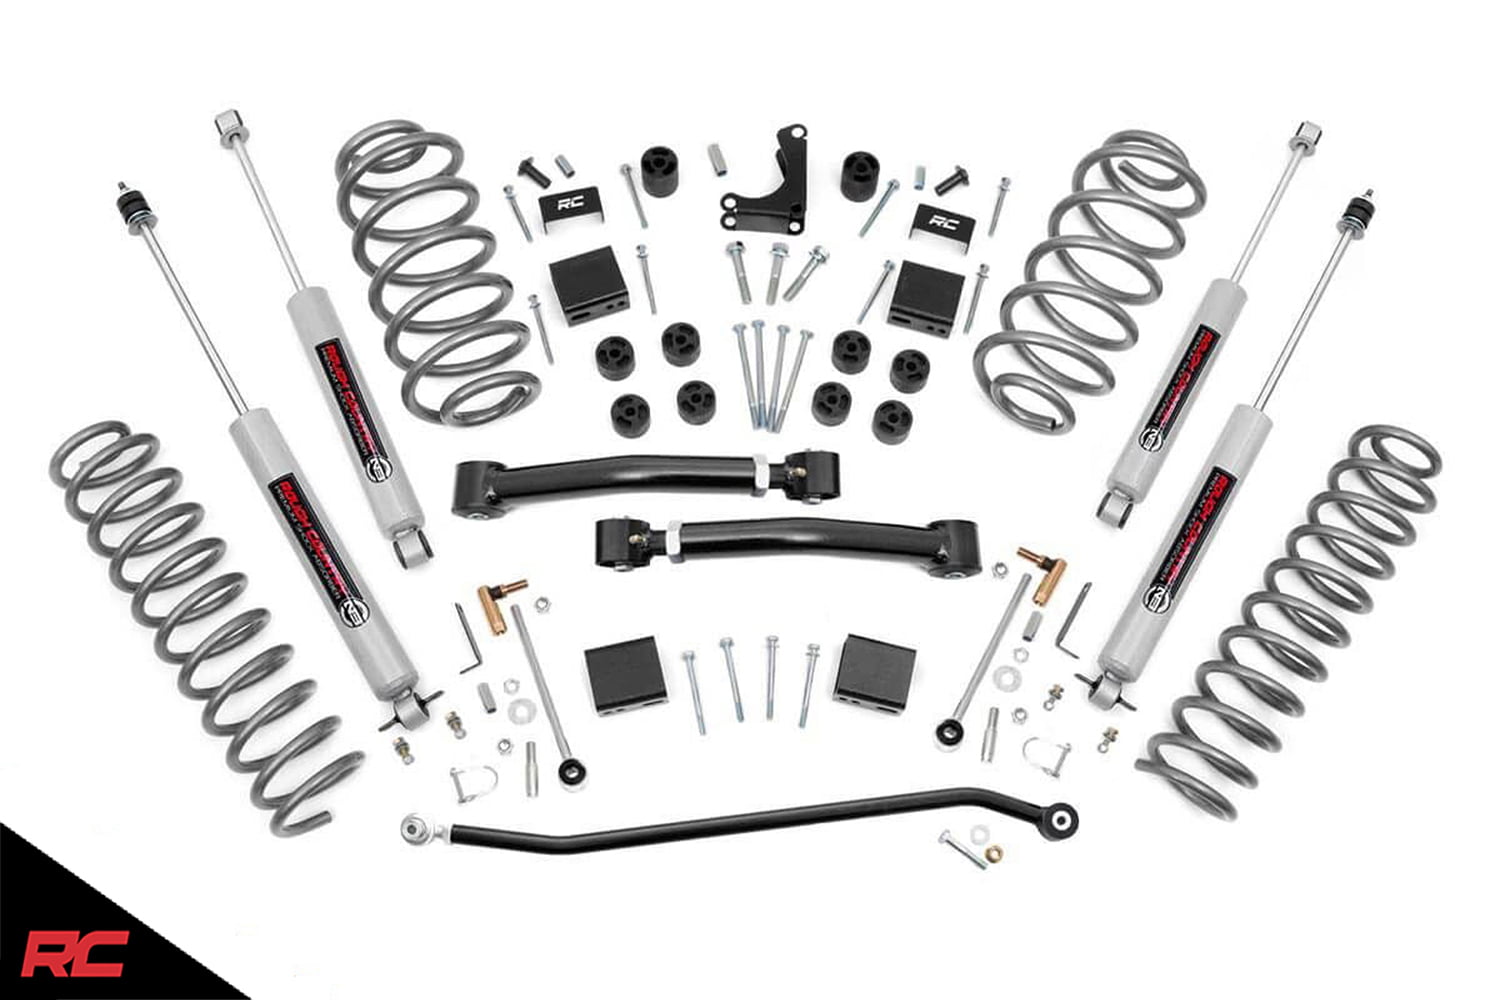 Rough Country 4" Lift Kit (fits) 19992004 Jeep Grand